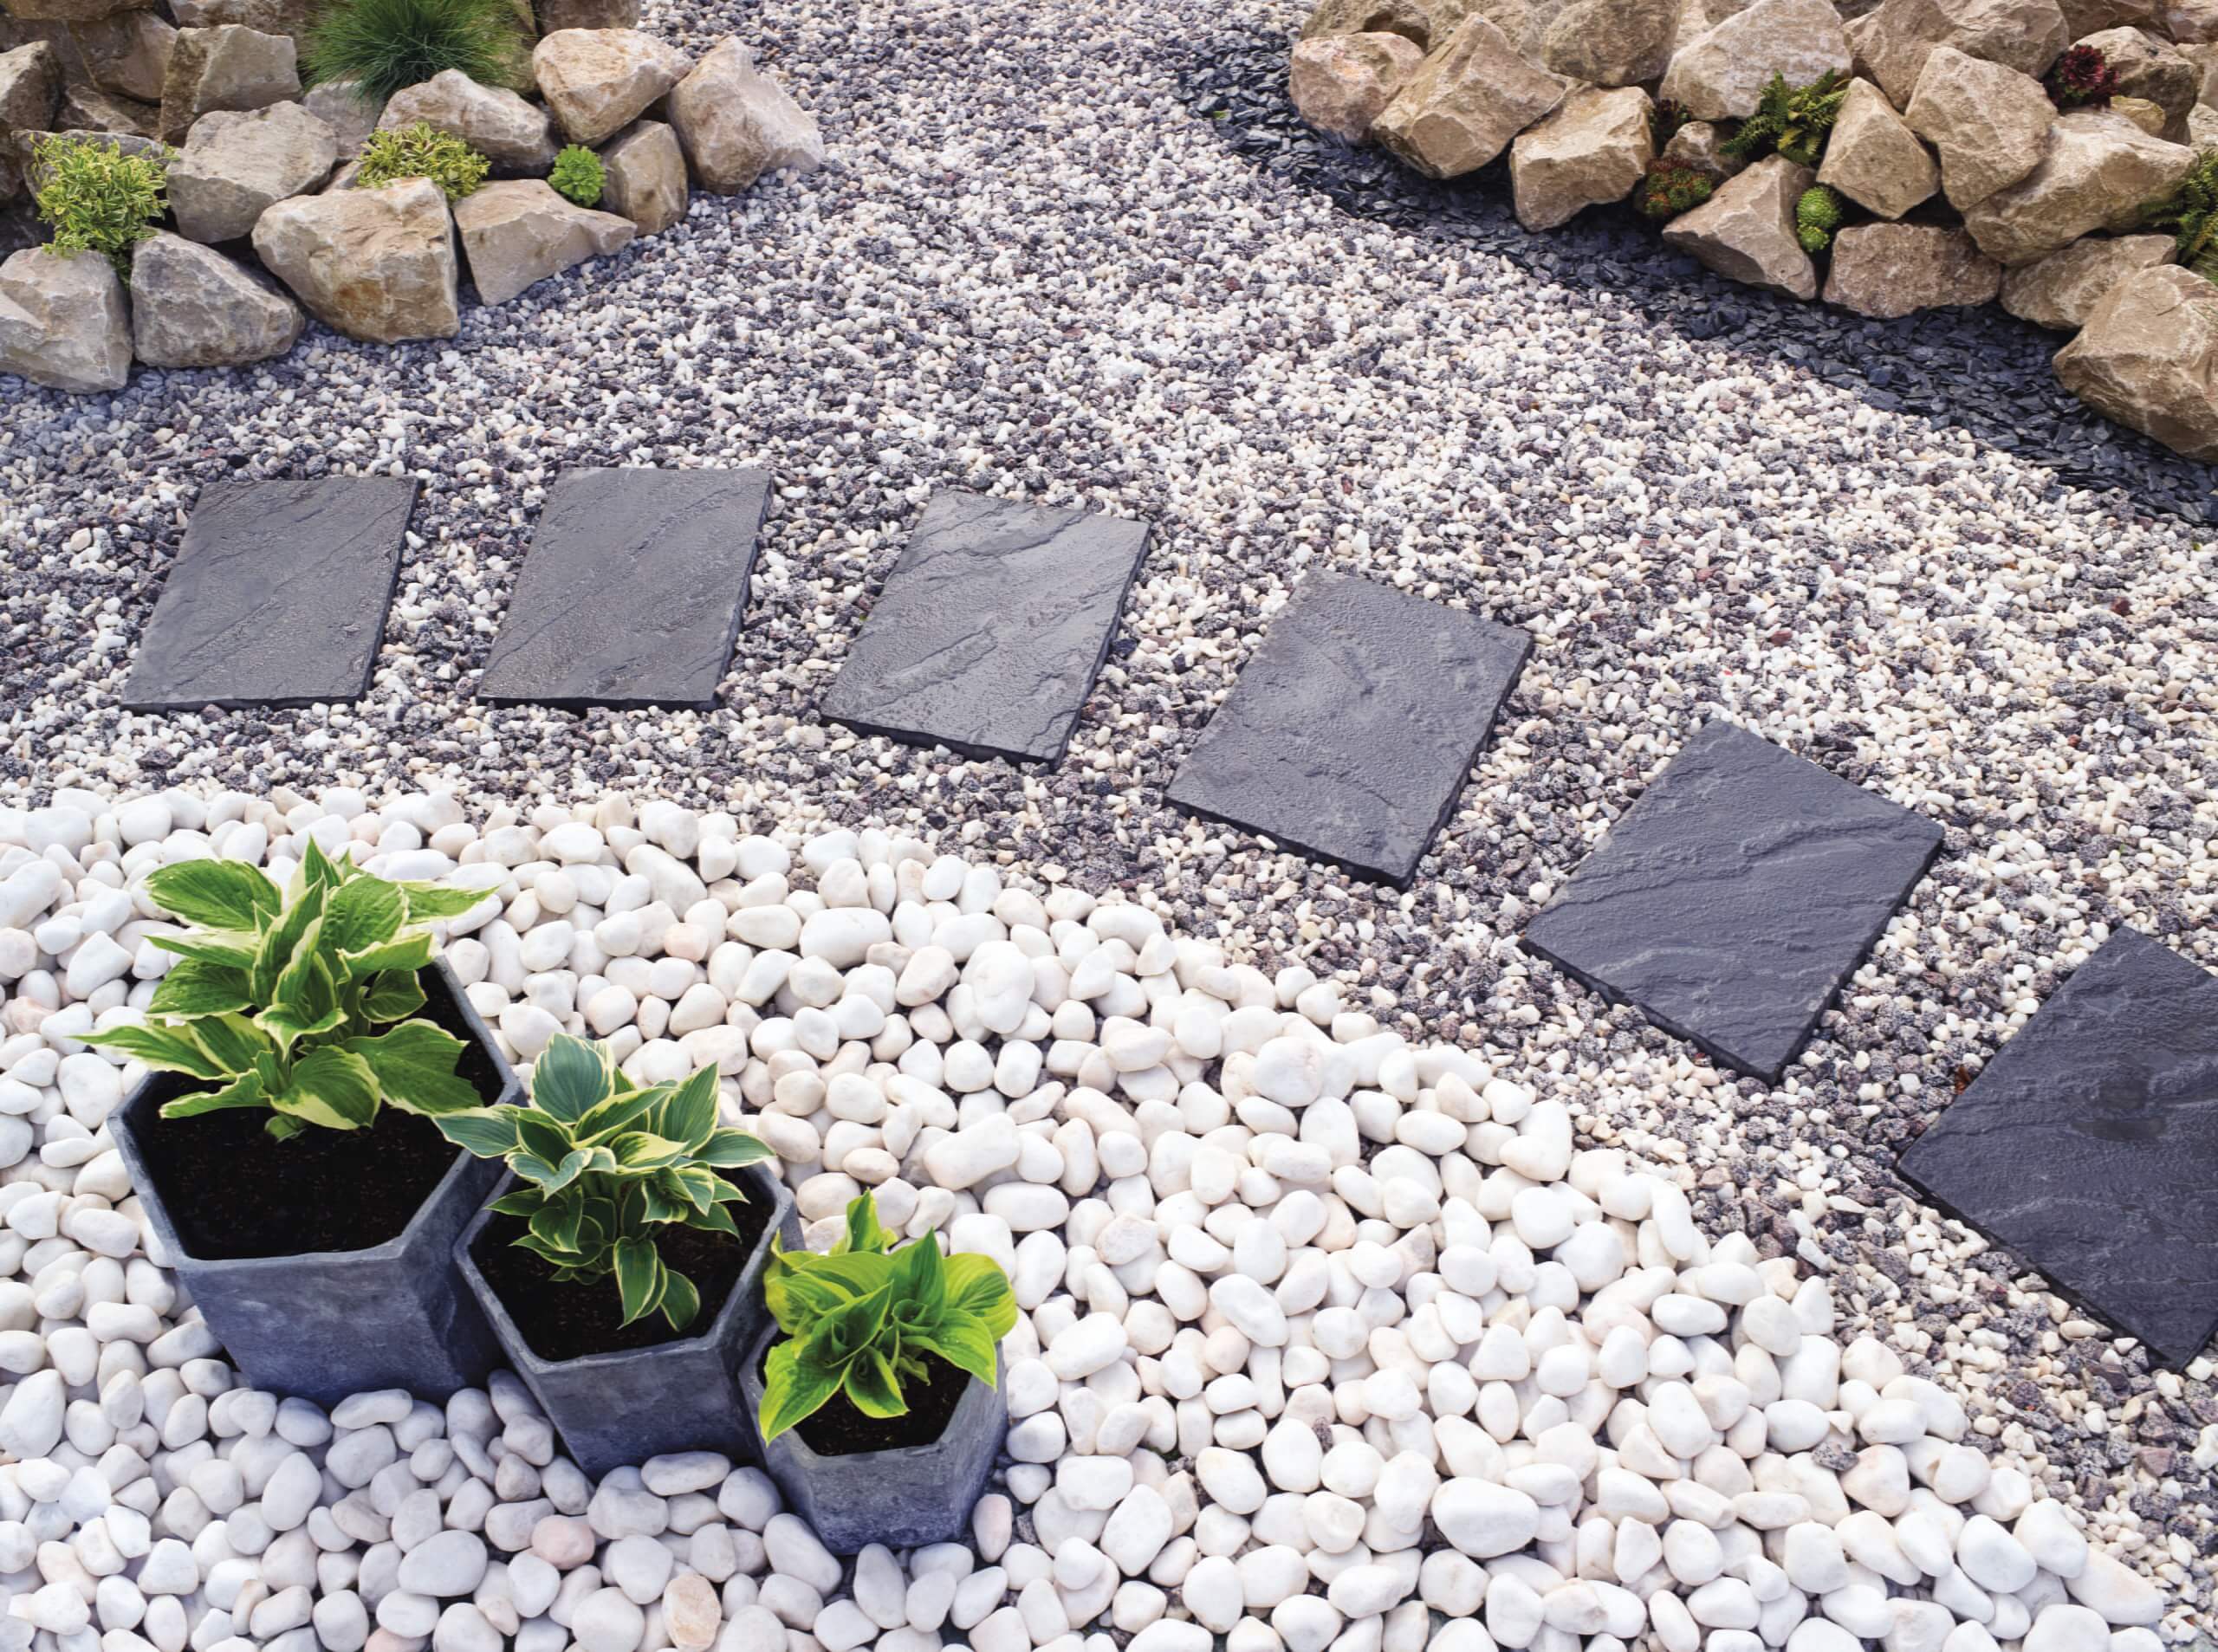 A gravel path winding through plants and stones. Plan for Delivery and Installation